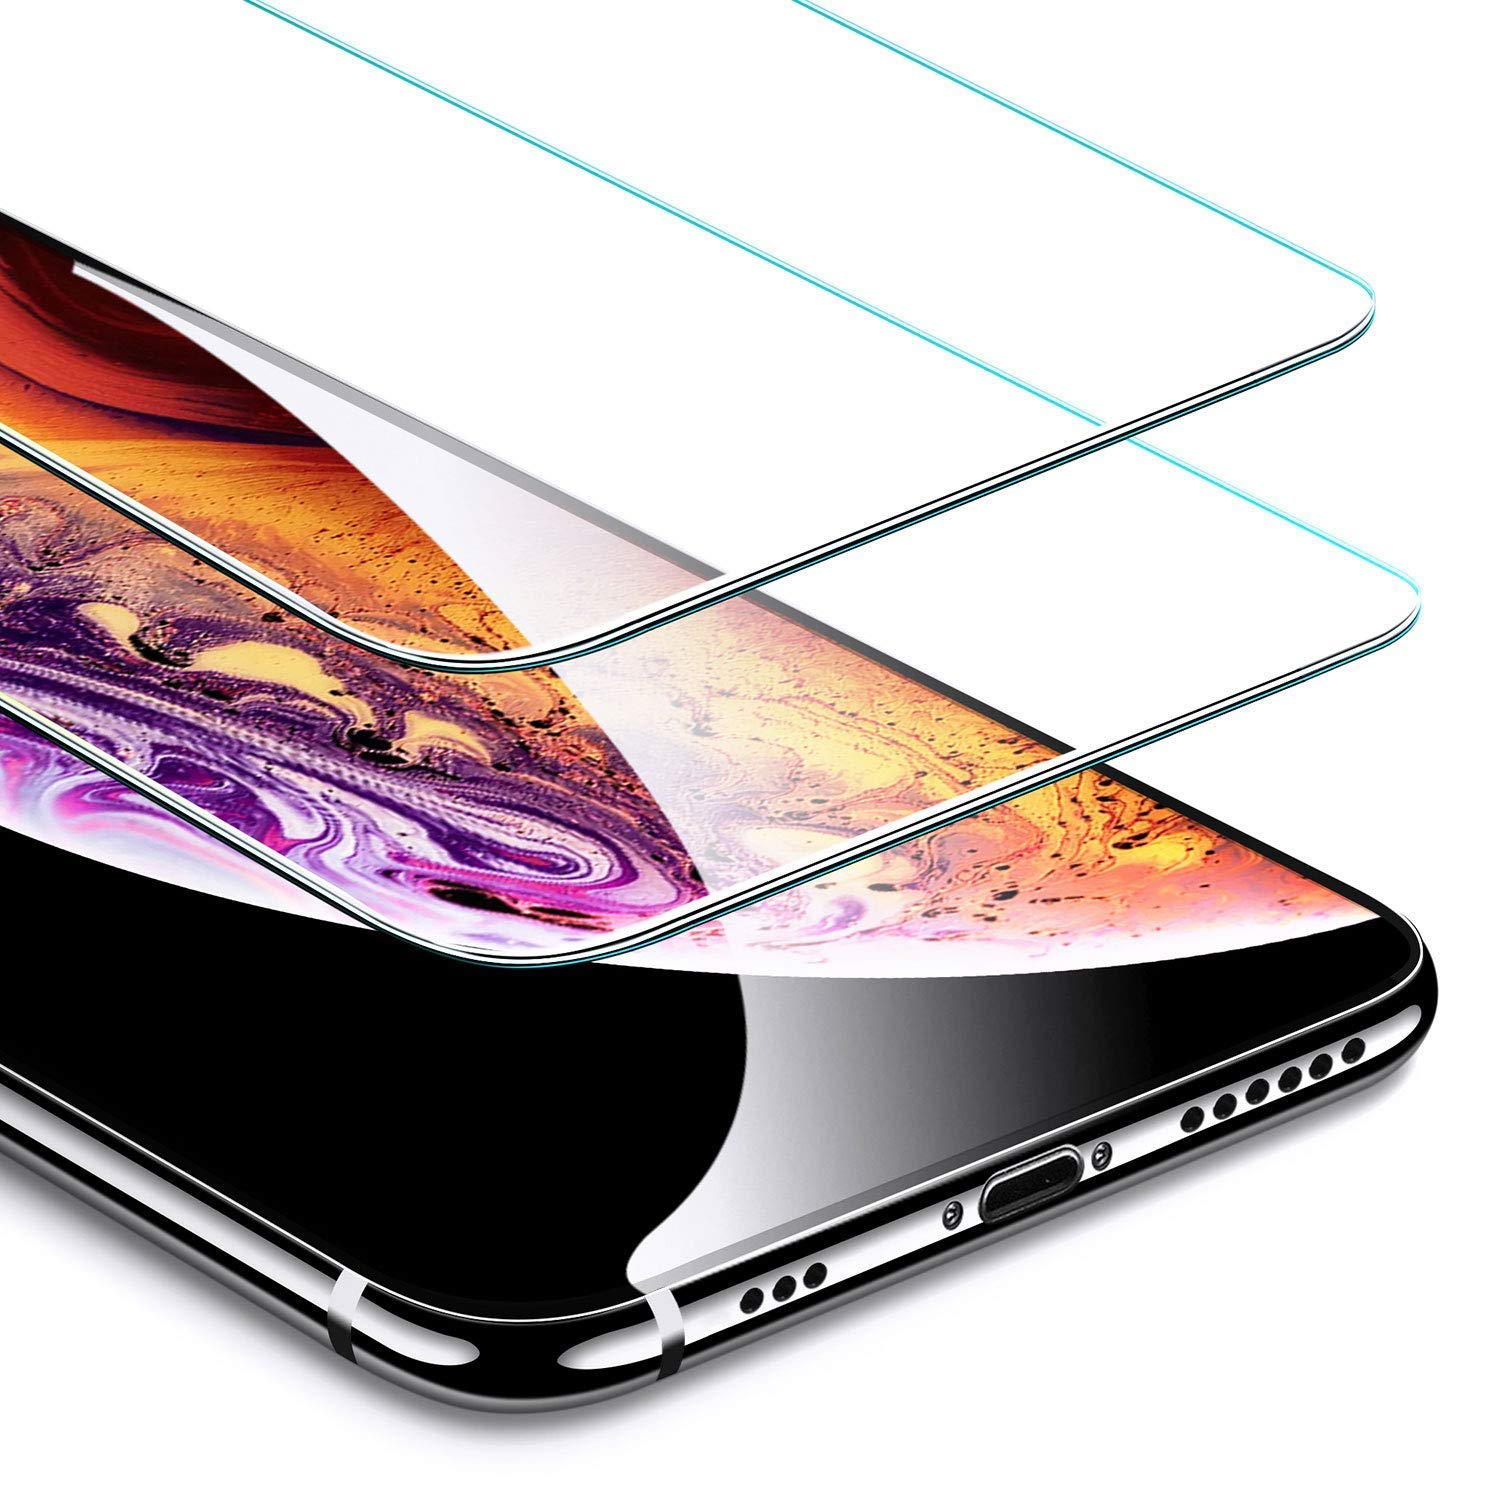 Ailun Screen Protector Compatible iPhone Xs